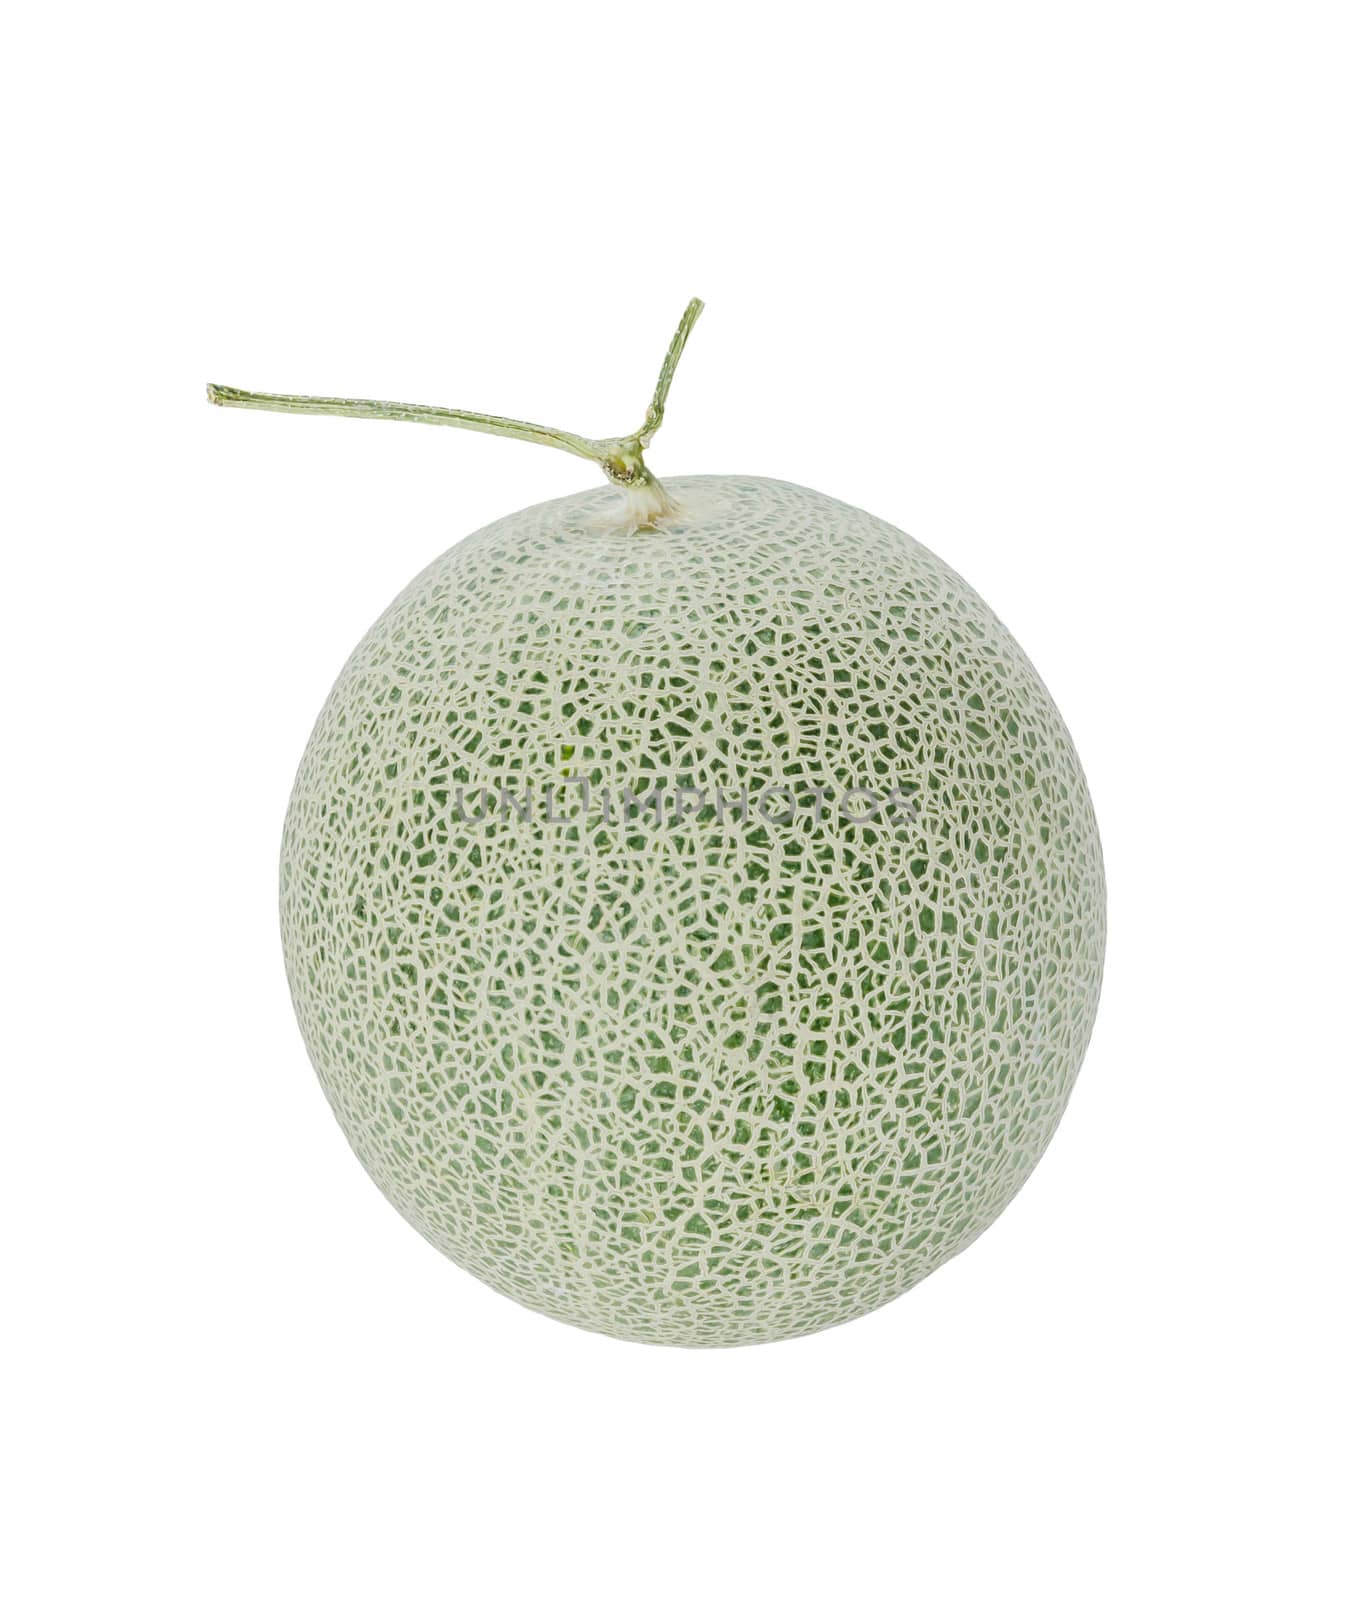 shopped green melon isolated on white background